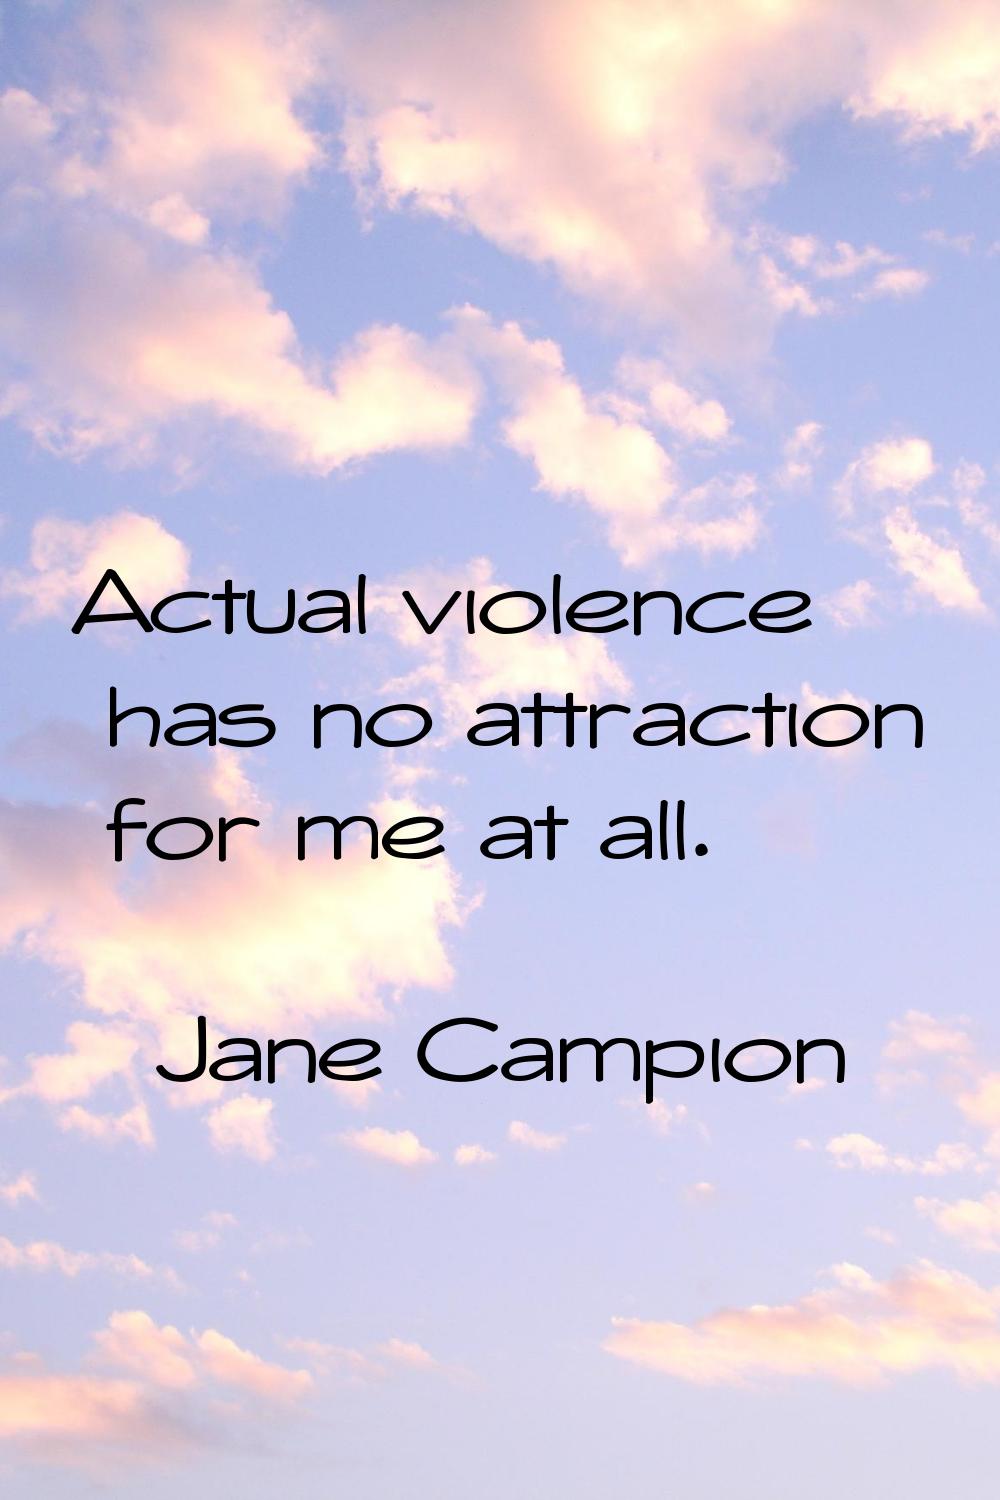 Actual violence has no attraction for me at all.